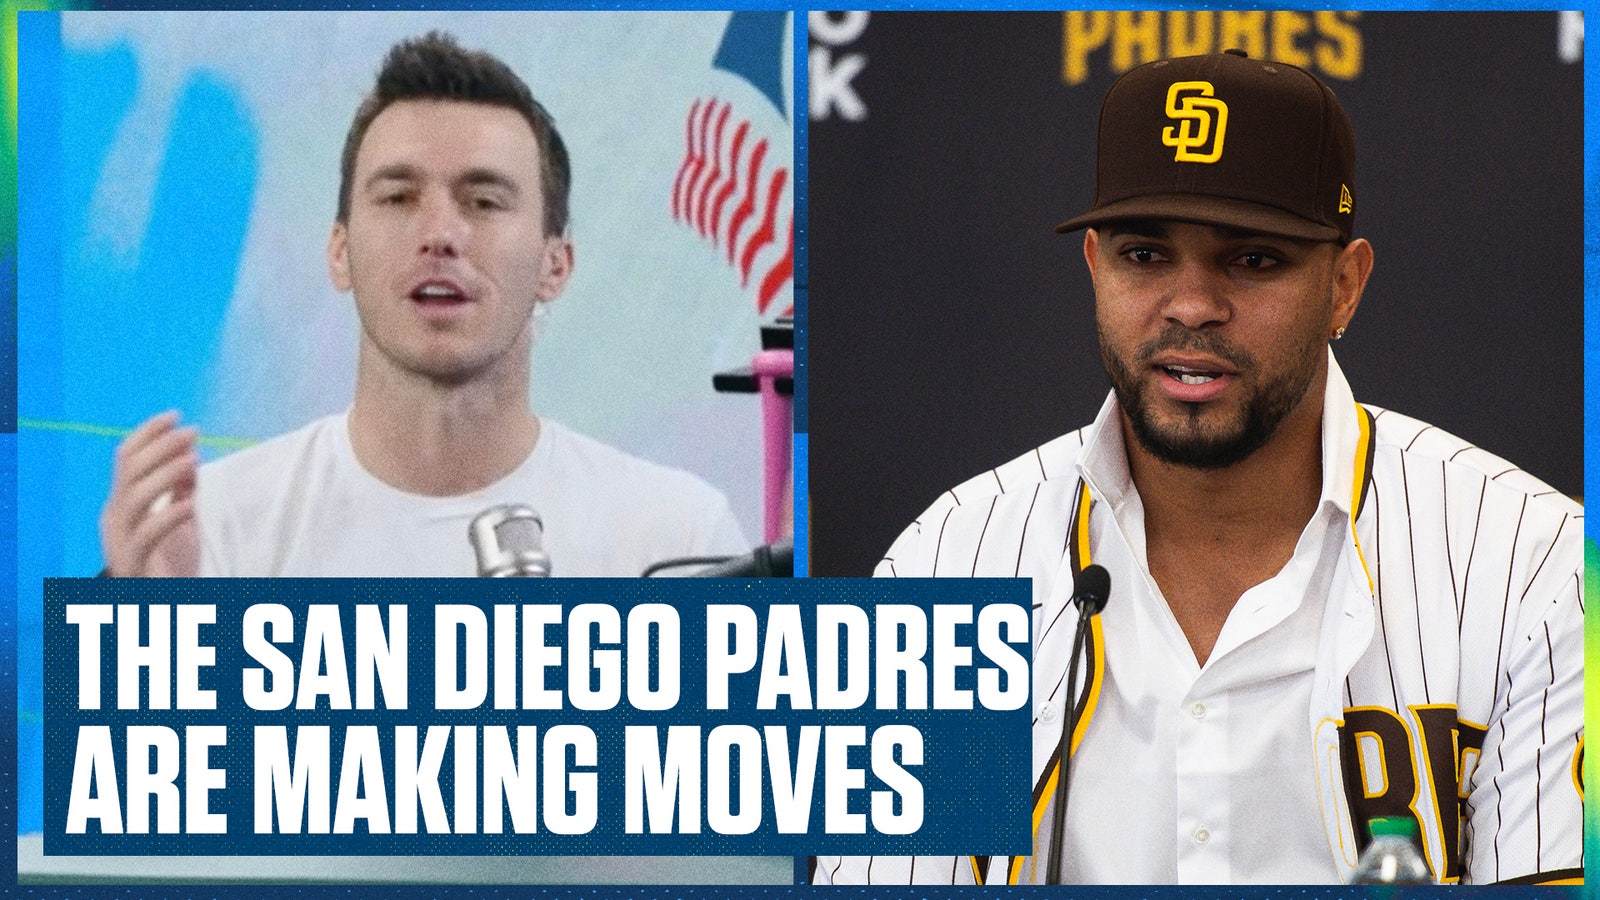 The changes the Padres are making and what it means for baseball